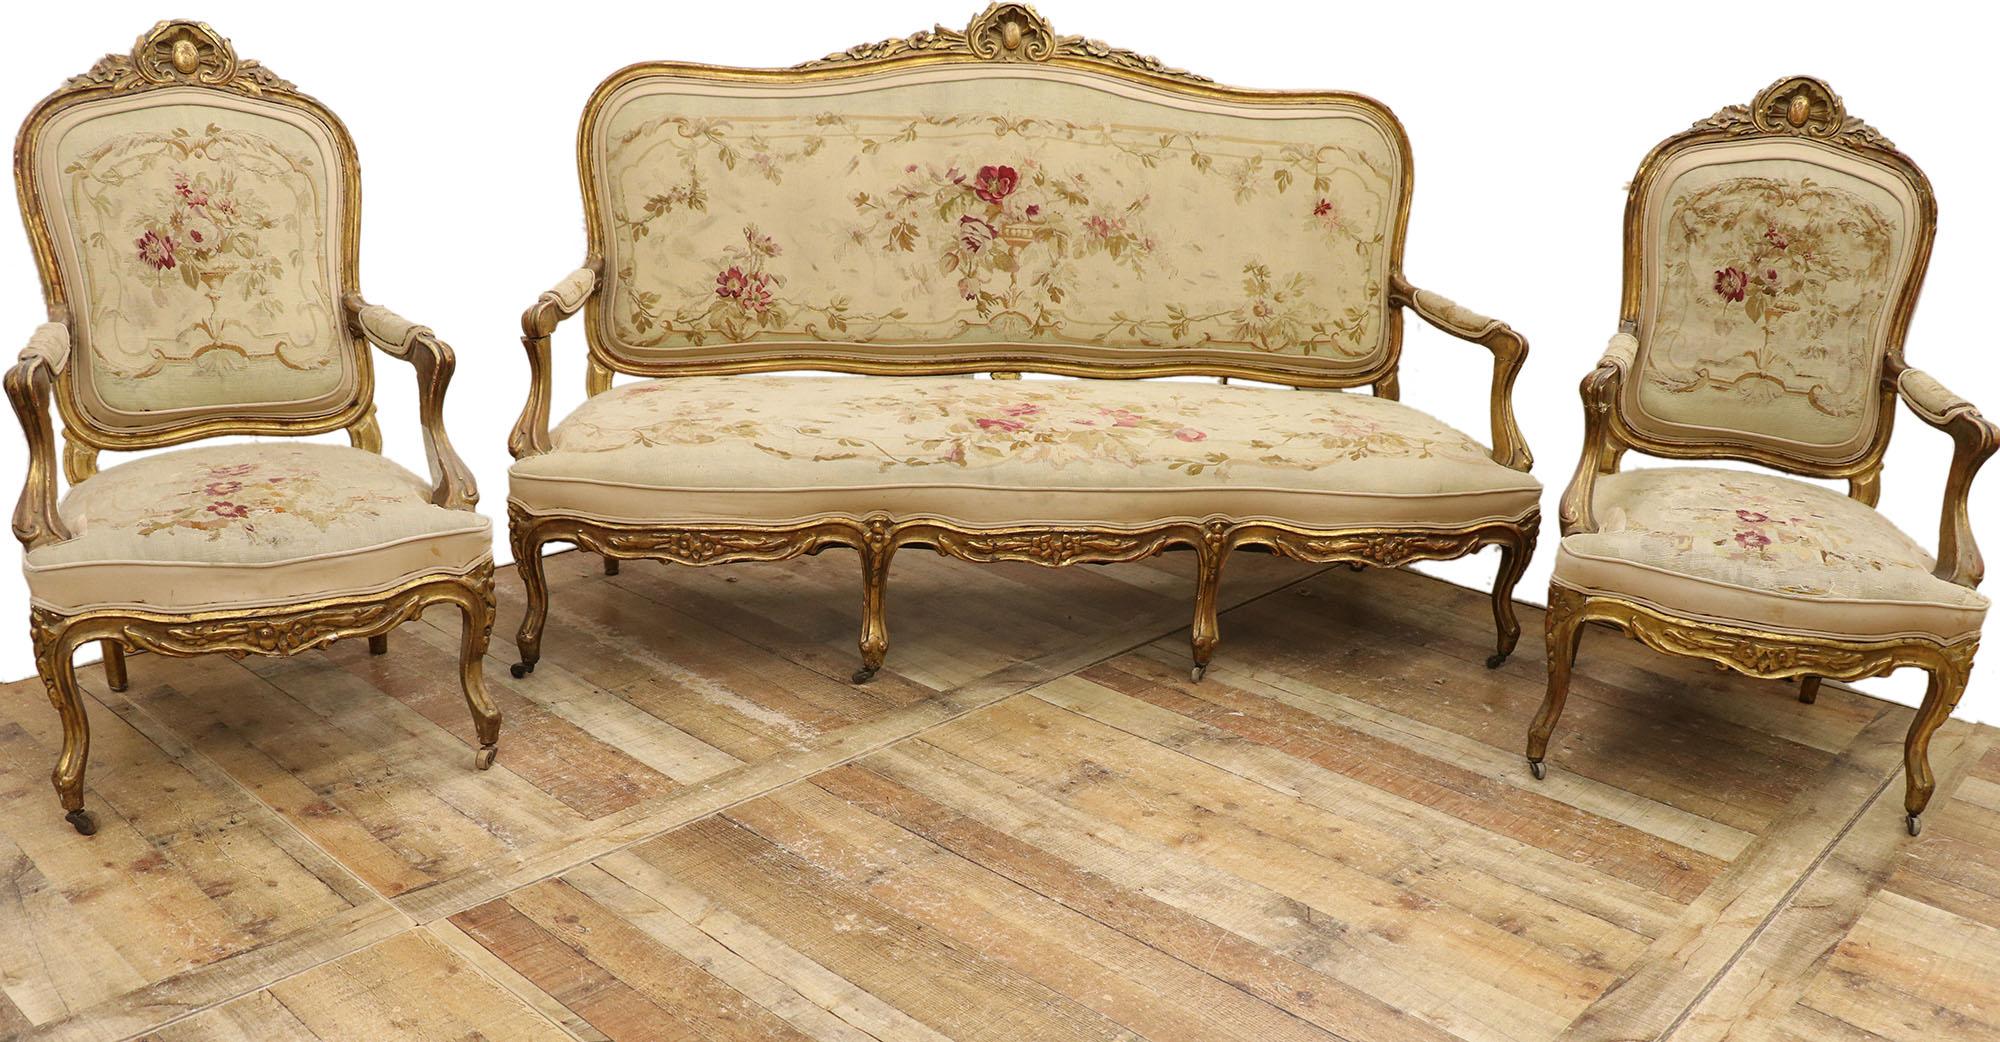 1870's Antique French Giltwood Aubusson Salon Set, Settee and Fauteuils For Sale 7